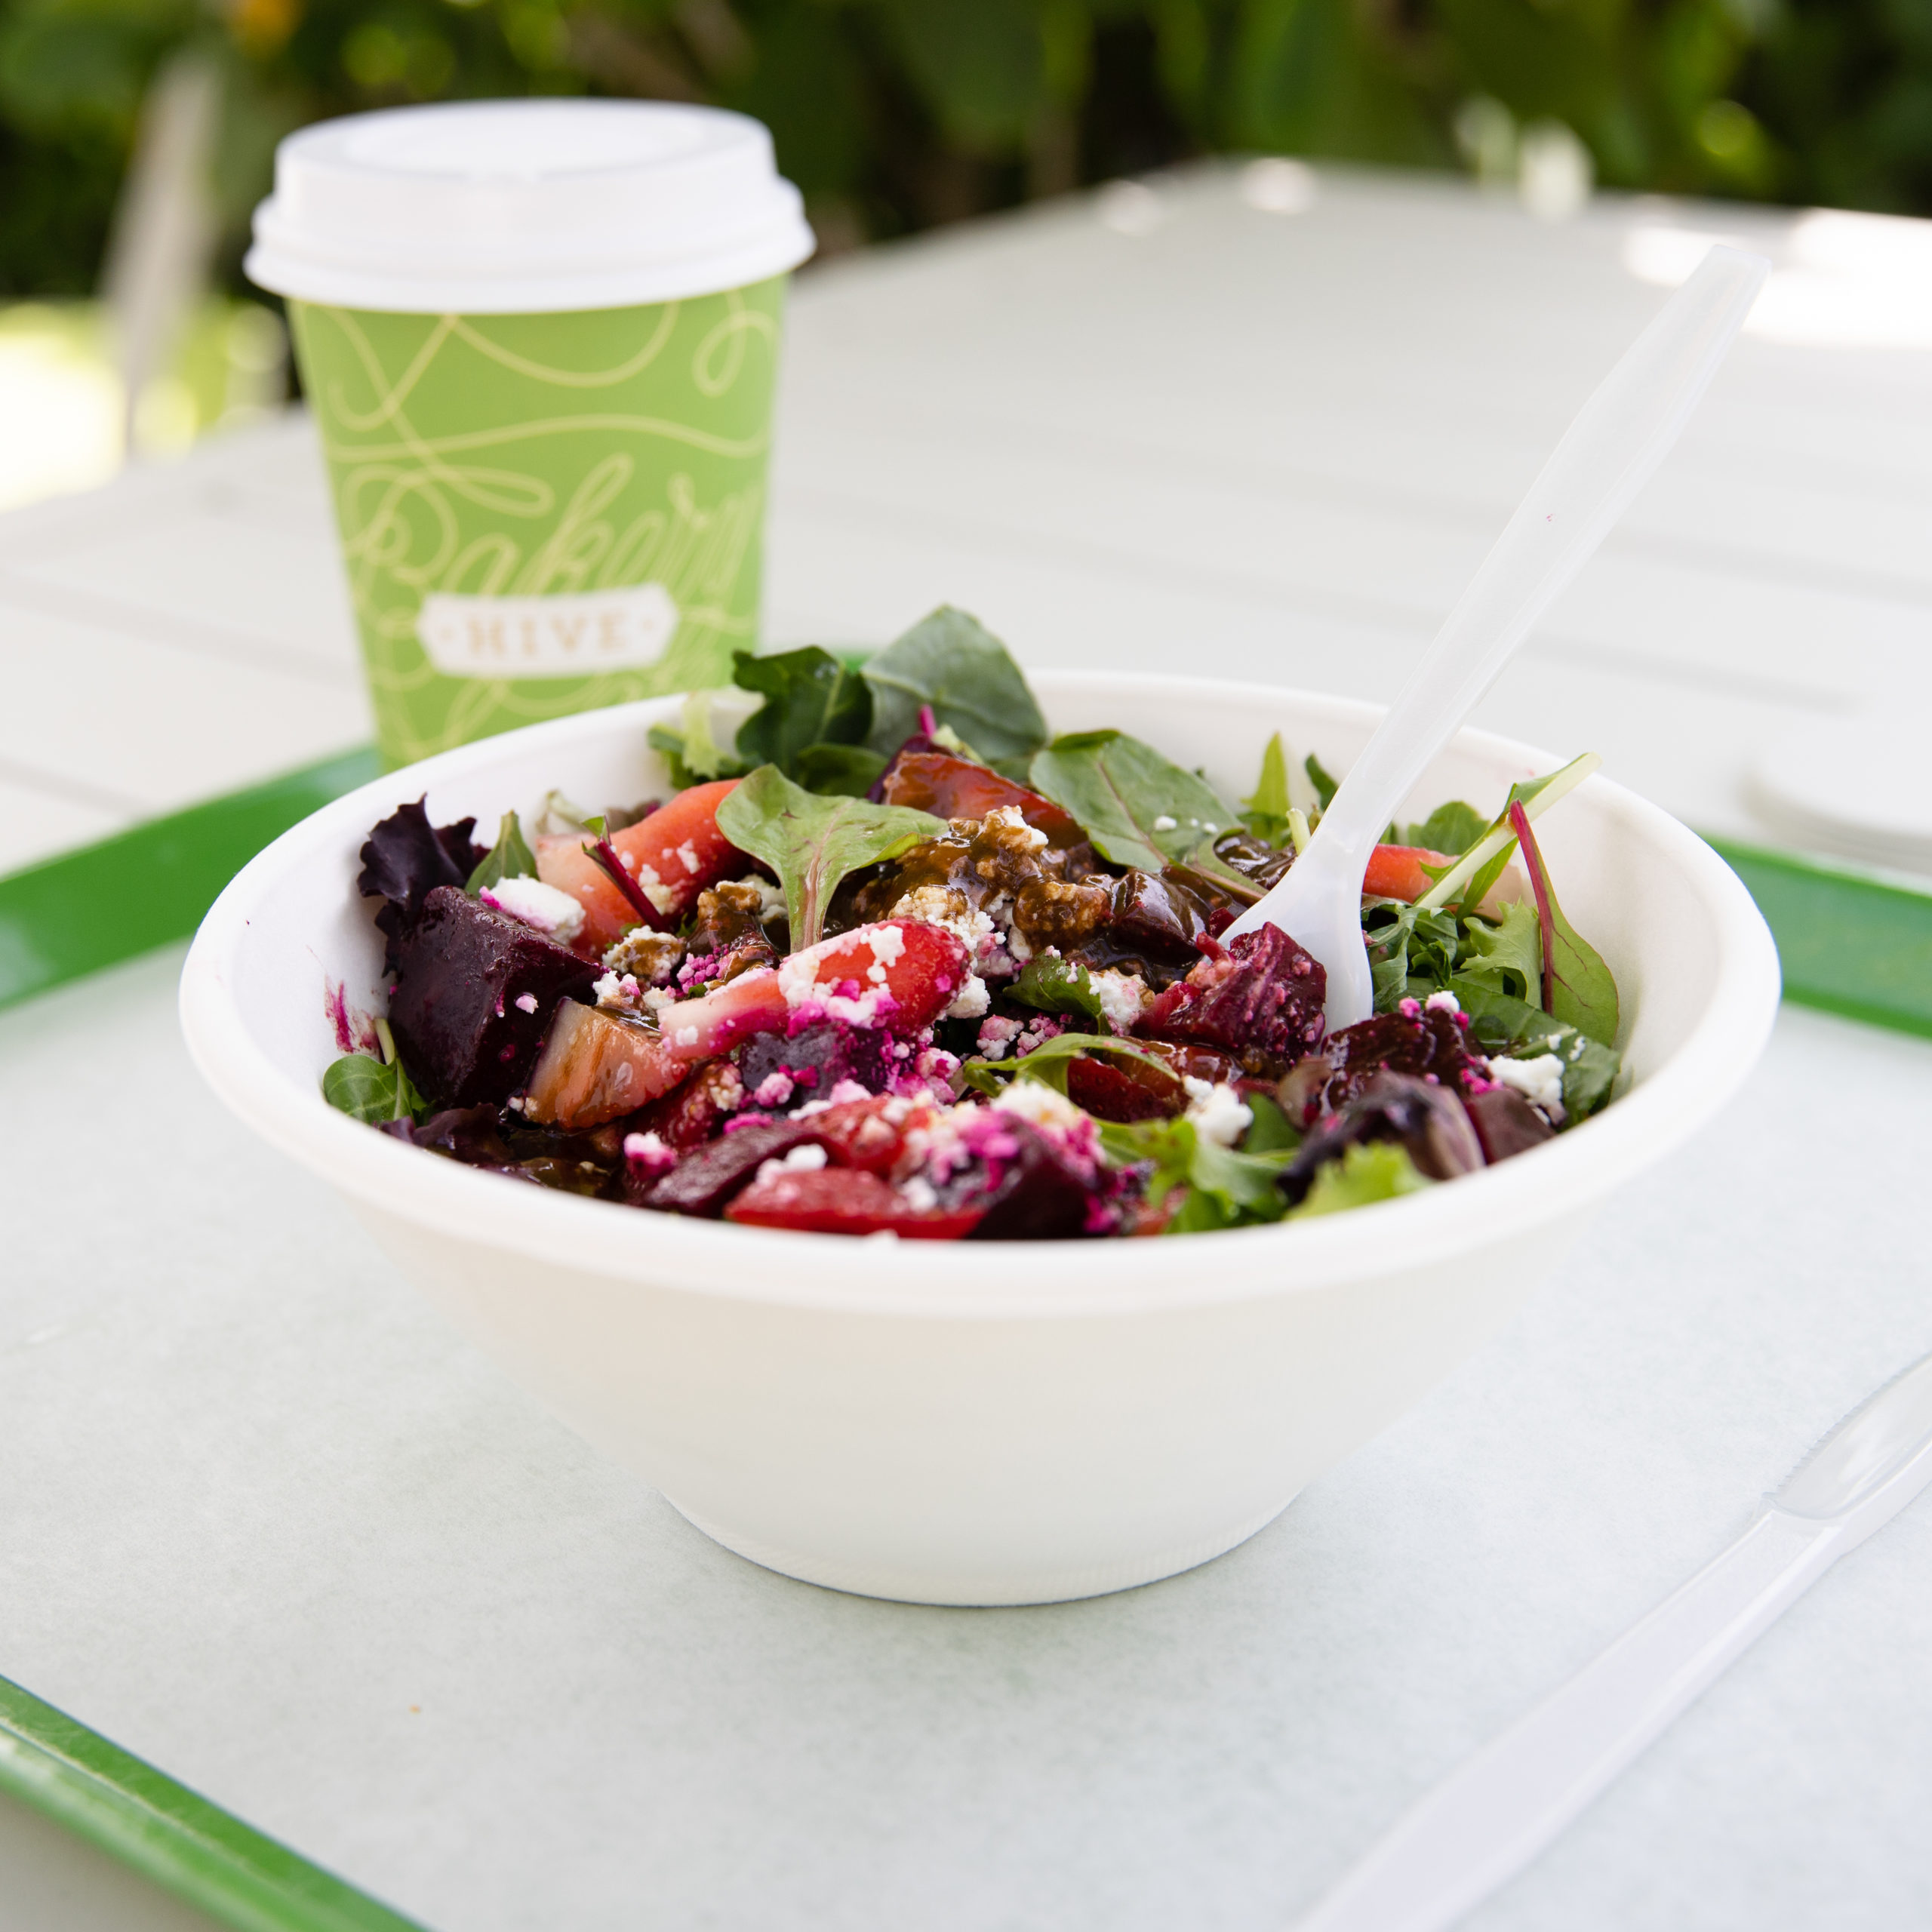 Photo of salad and Hive coffee cup